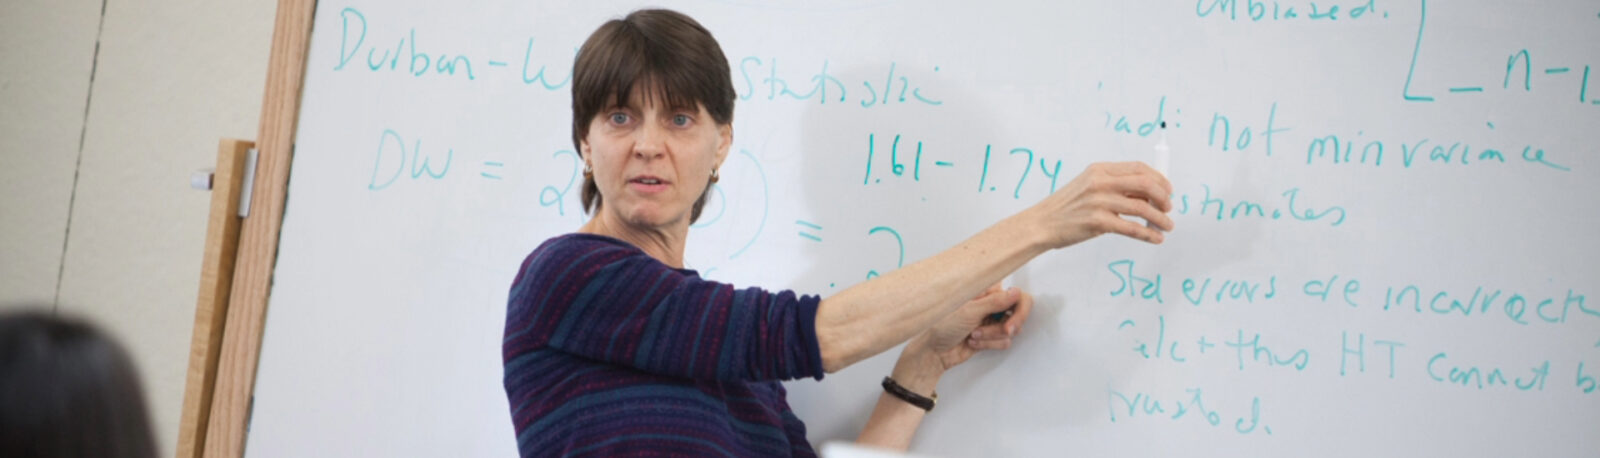 A woman stands in front of a whiteboard gesturing to the writing on the board.